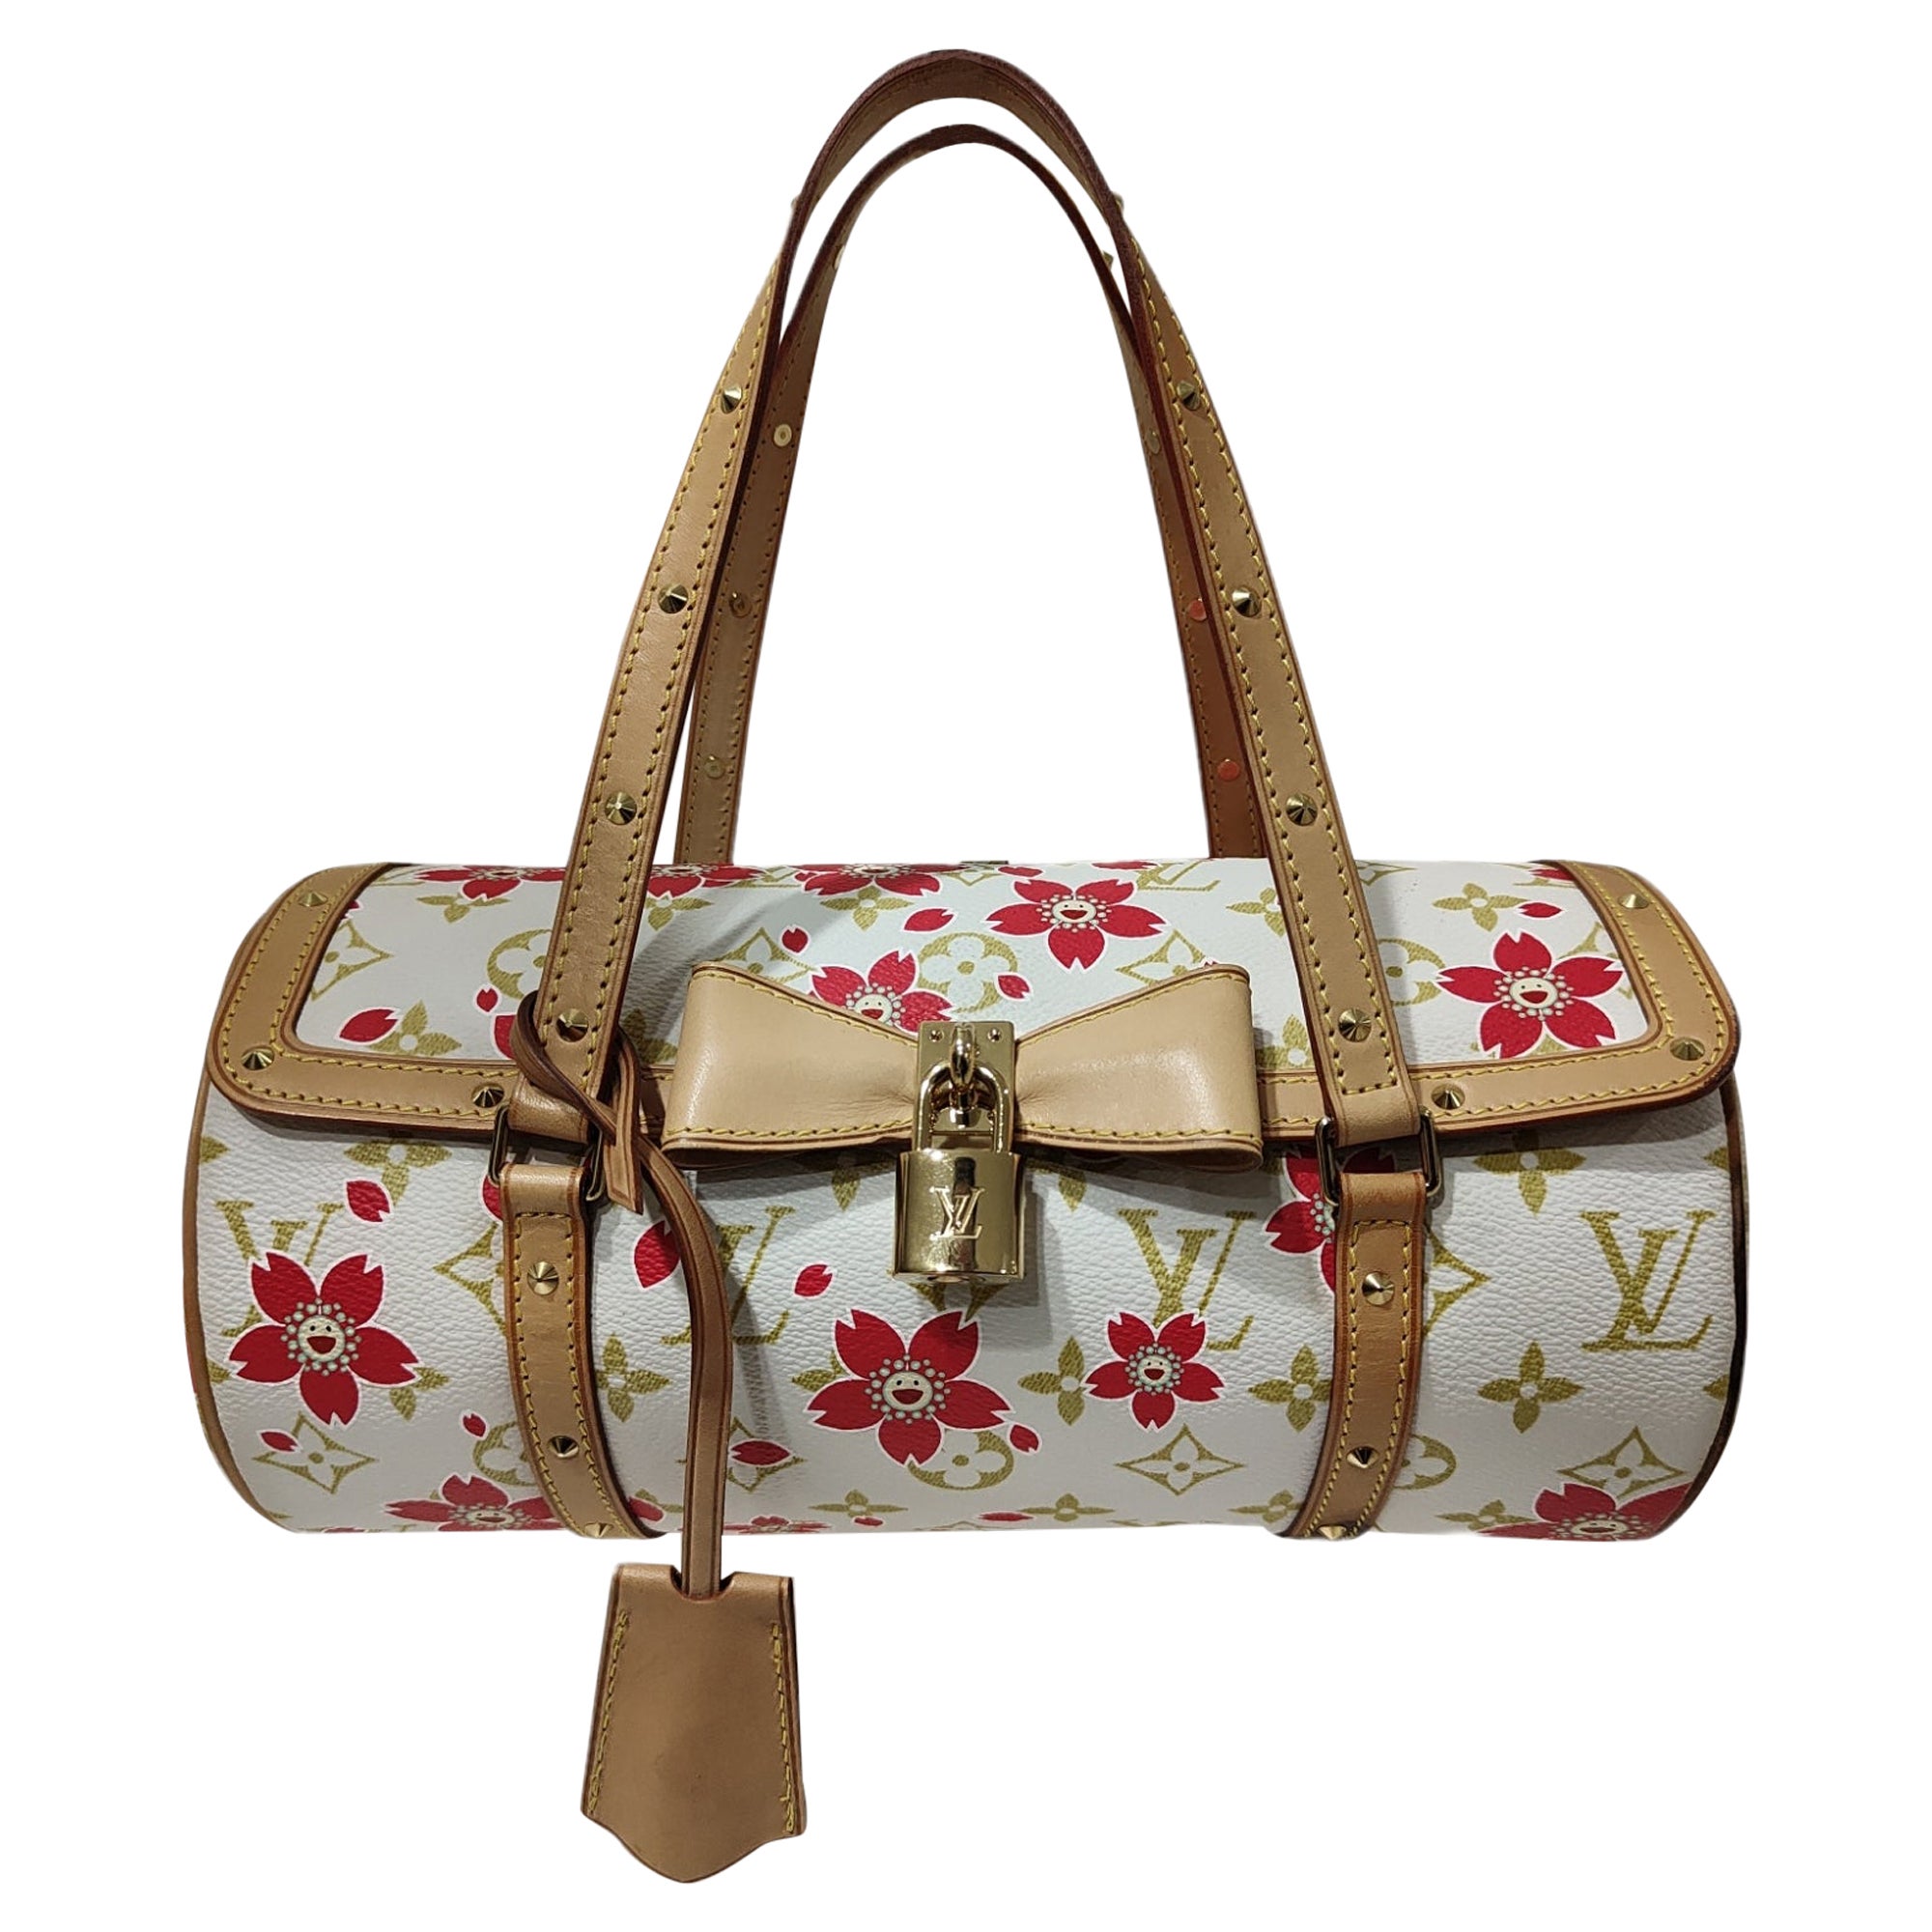 A SET OF TWO: A LIMITED EDITION CHERRY BLOSSOM MONOGRAM PAPILLON